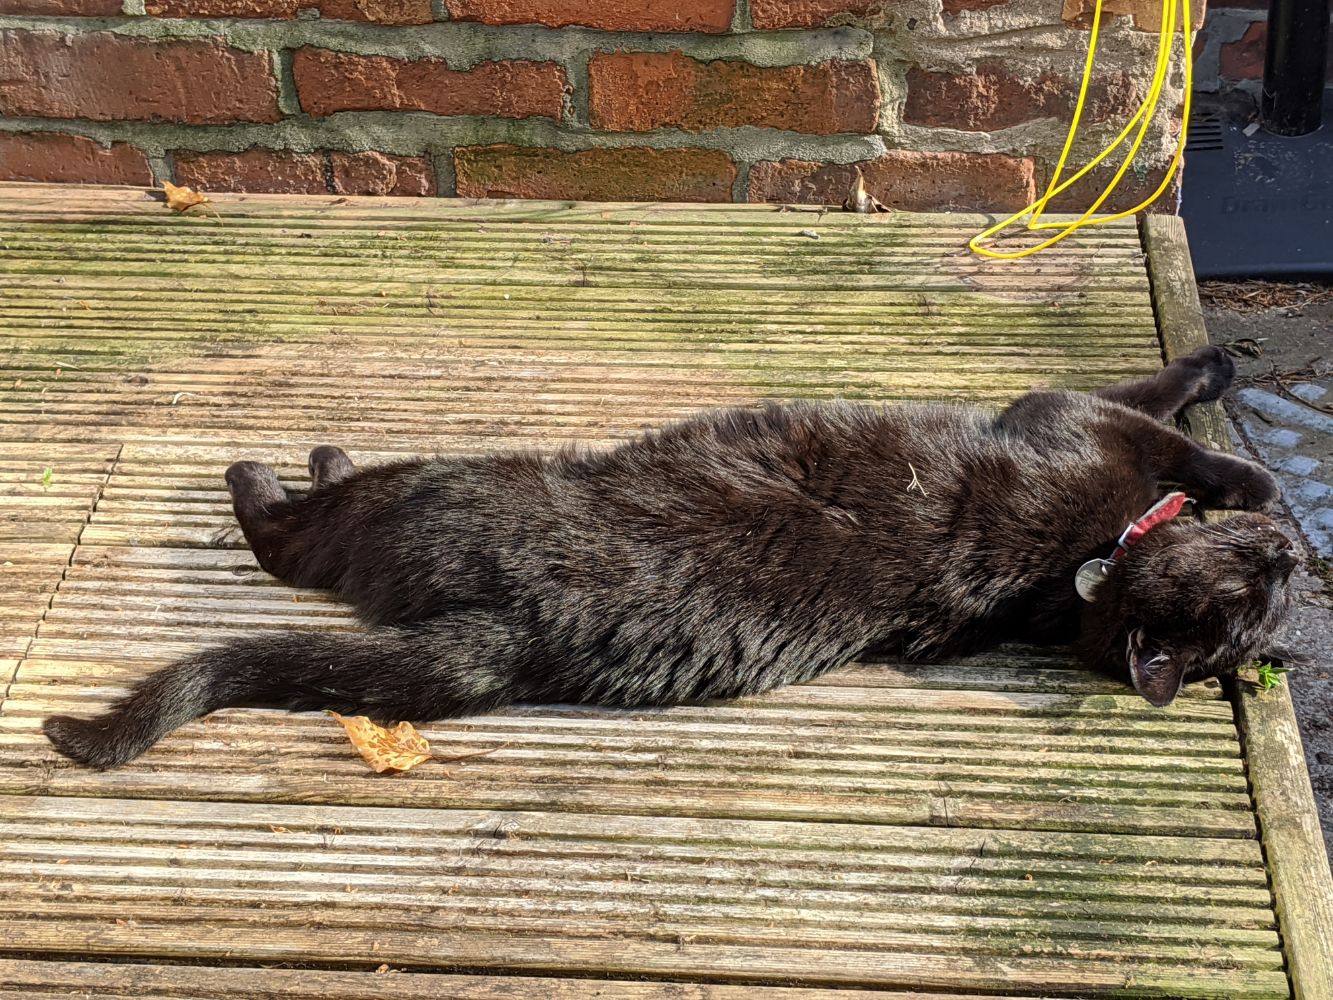 Black cat stretched out lying on the decking next to Jamie, looking very contented with his position for a snooze